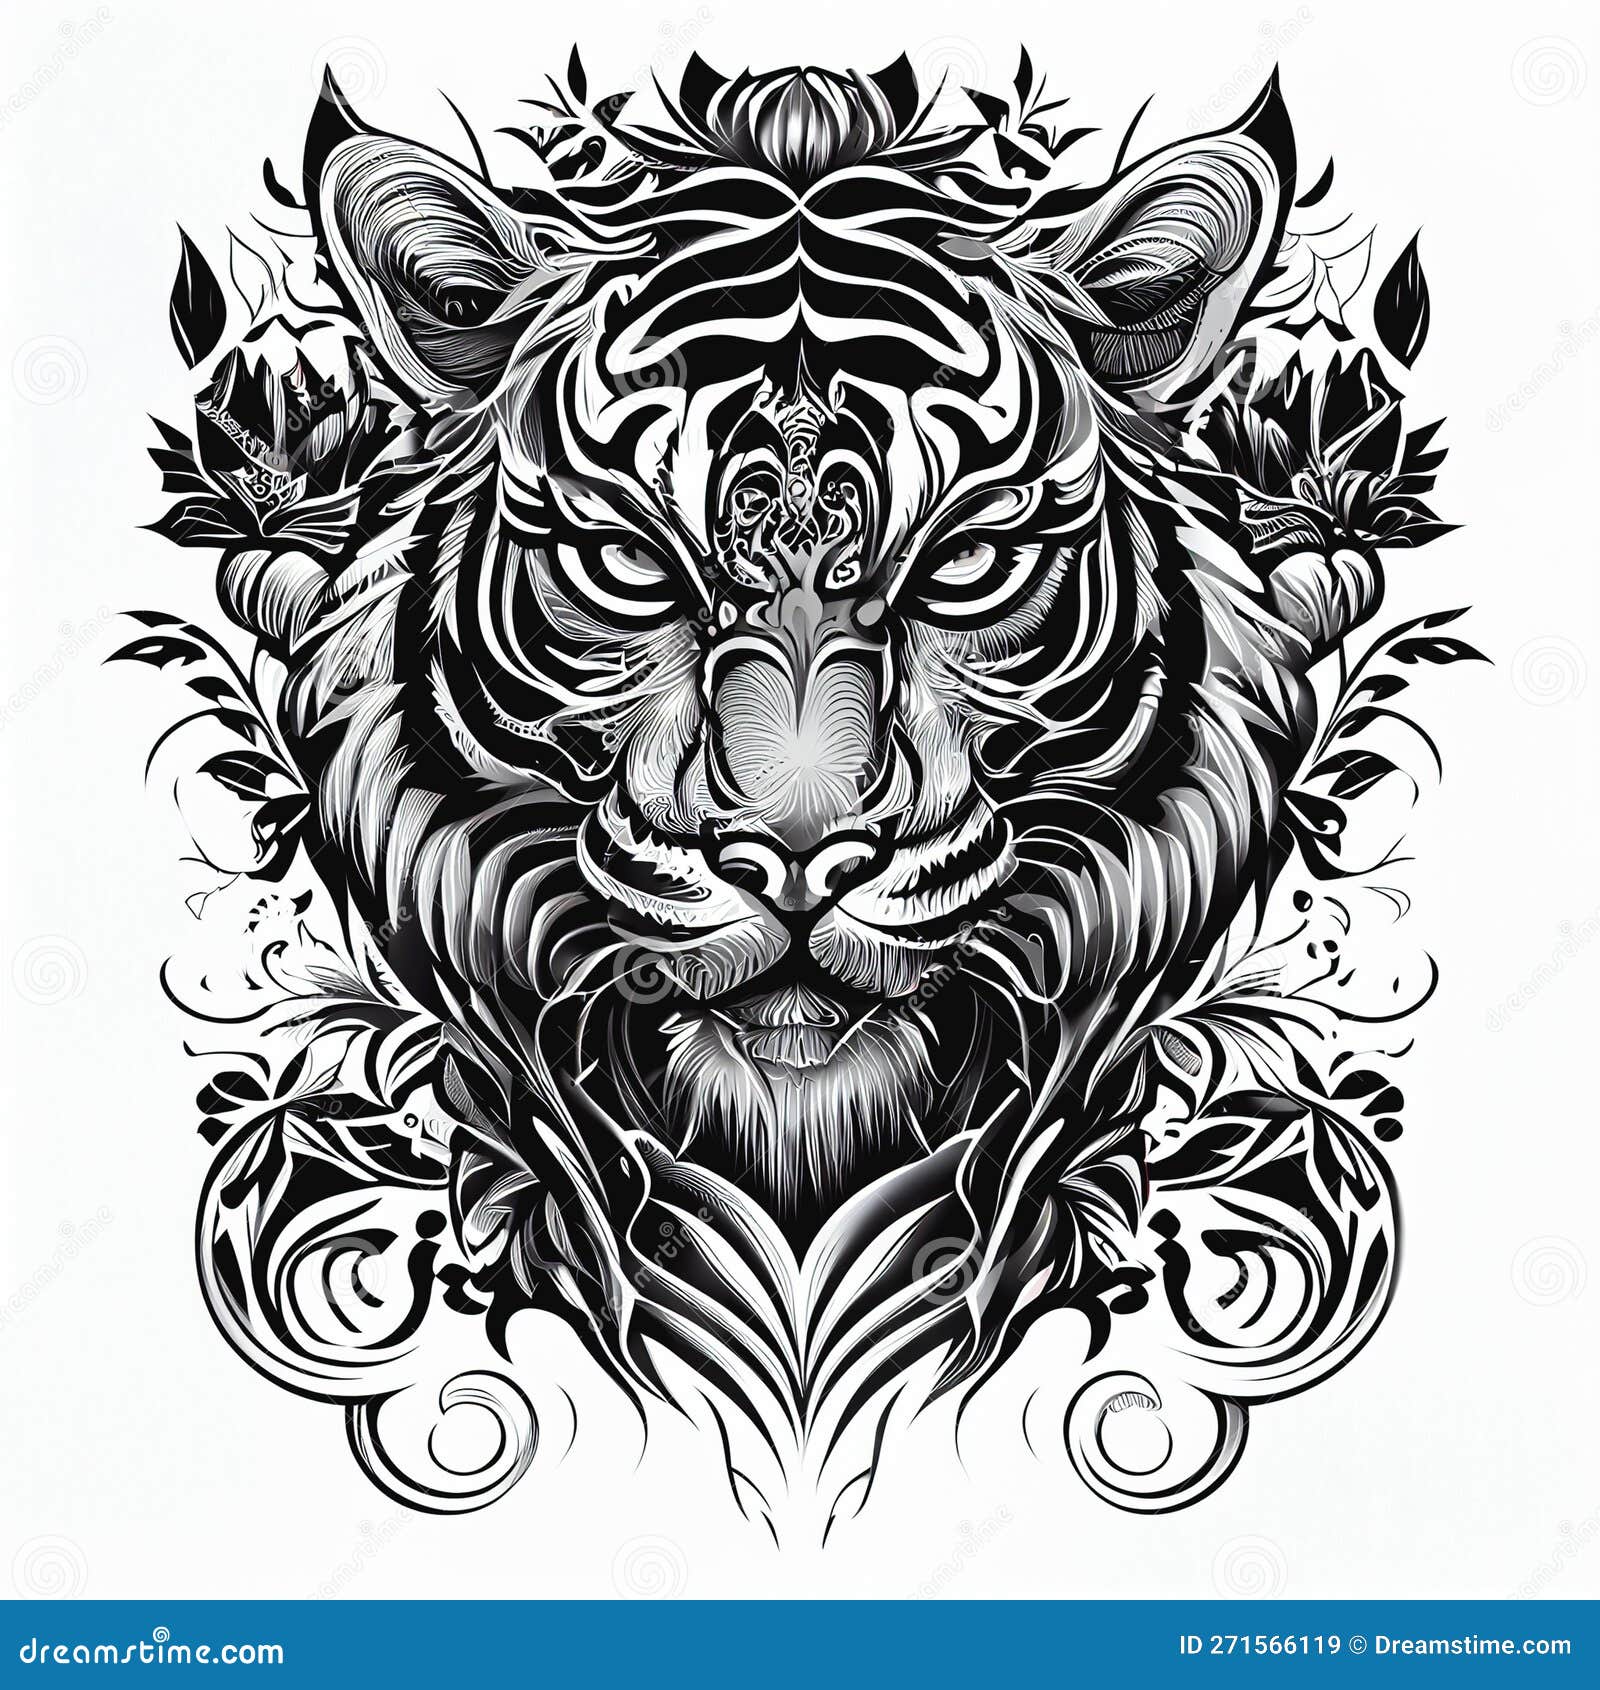 4,911 Tribal Tiger Tattoo Images, Stock Photos, 3D objects, & Vectors |  Shutterstock